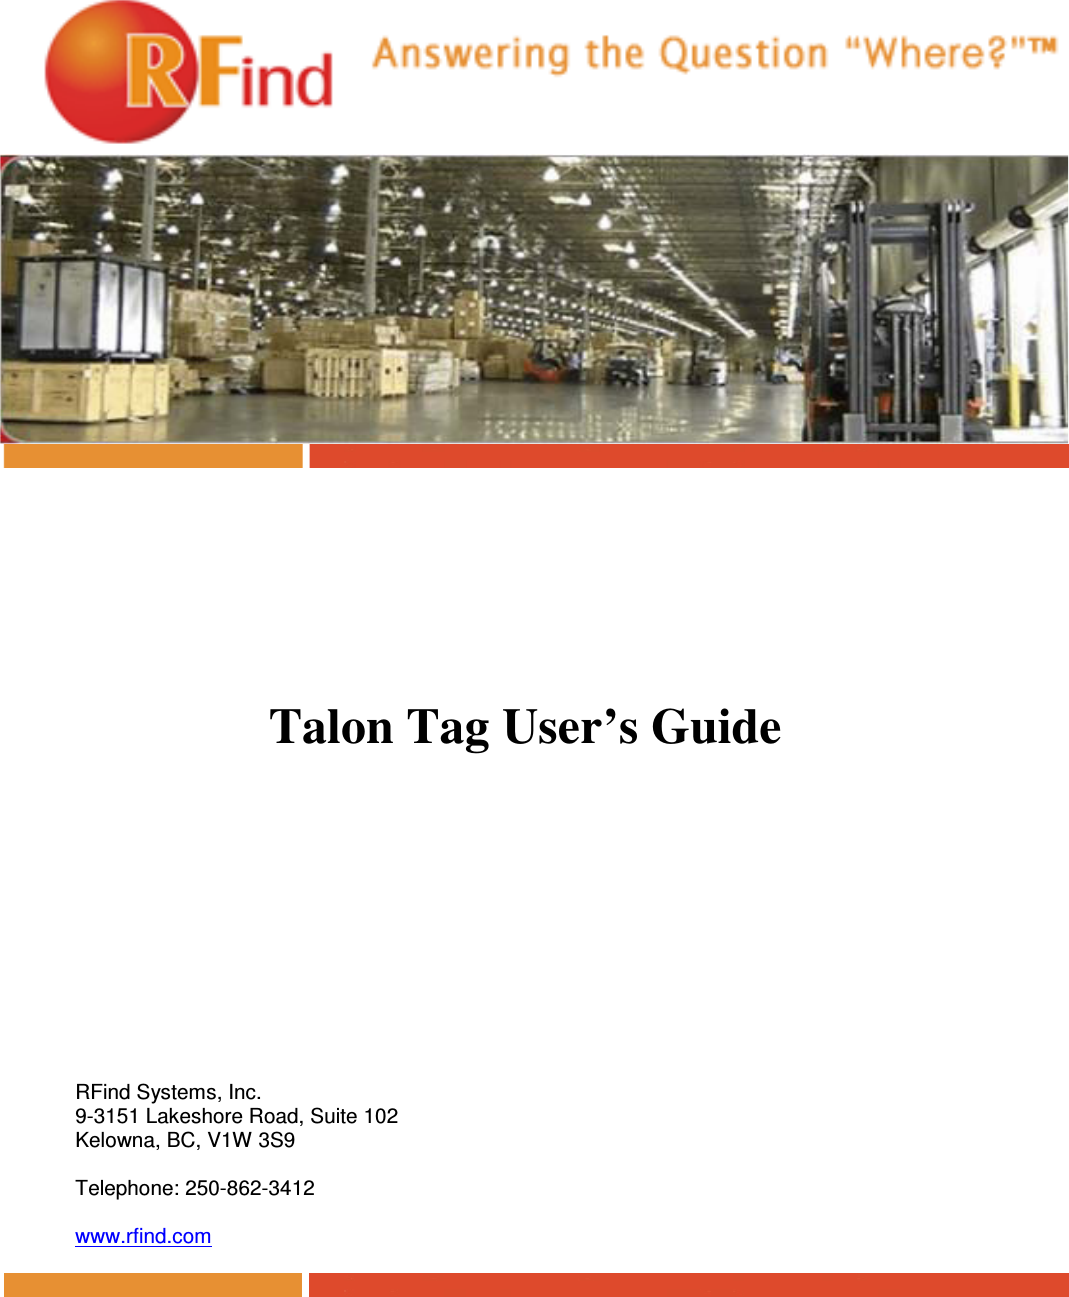         Talon Tag User’s Guide         RFind Systems, Inc. 9-3151 Lakeshore Road, Suite 102 Kelowna, BC, V1W 3S9  Telephone: 250-862-3412  www.rfind.com   